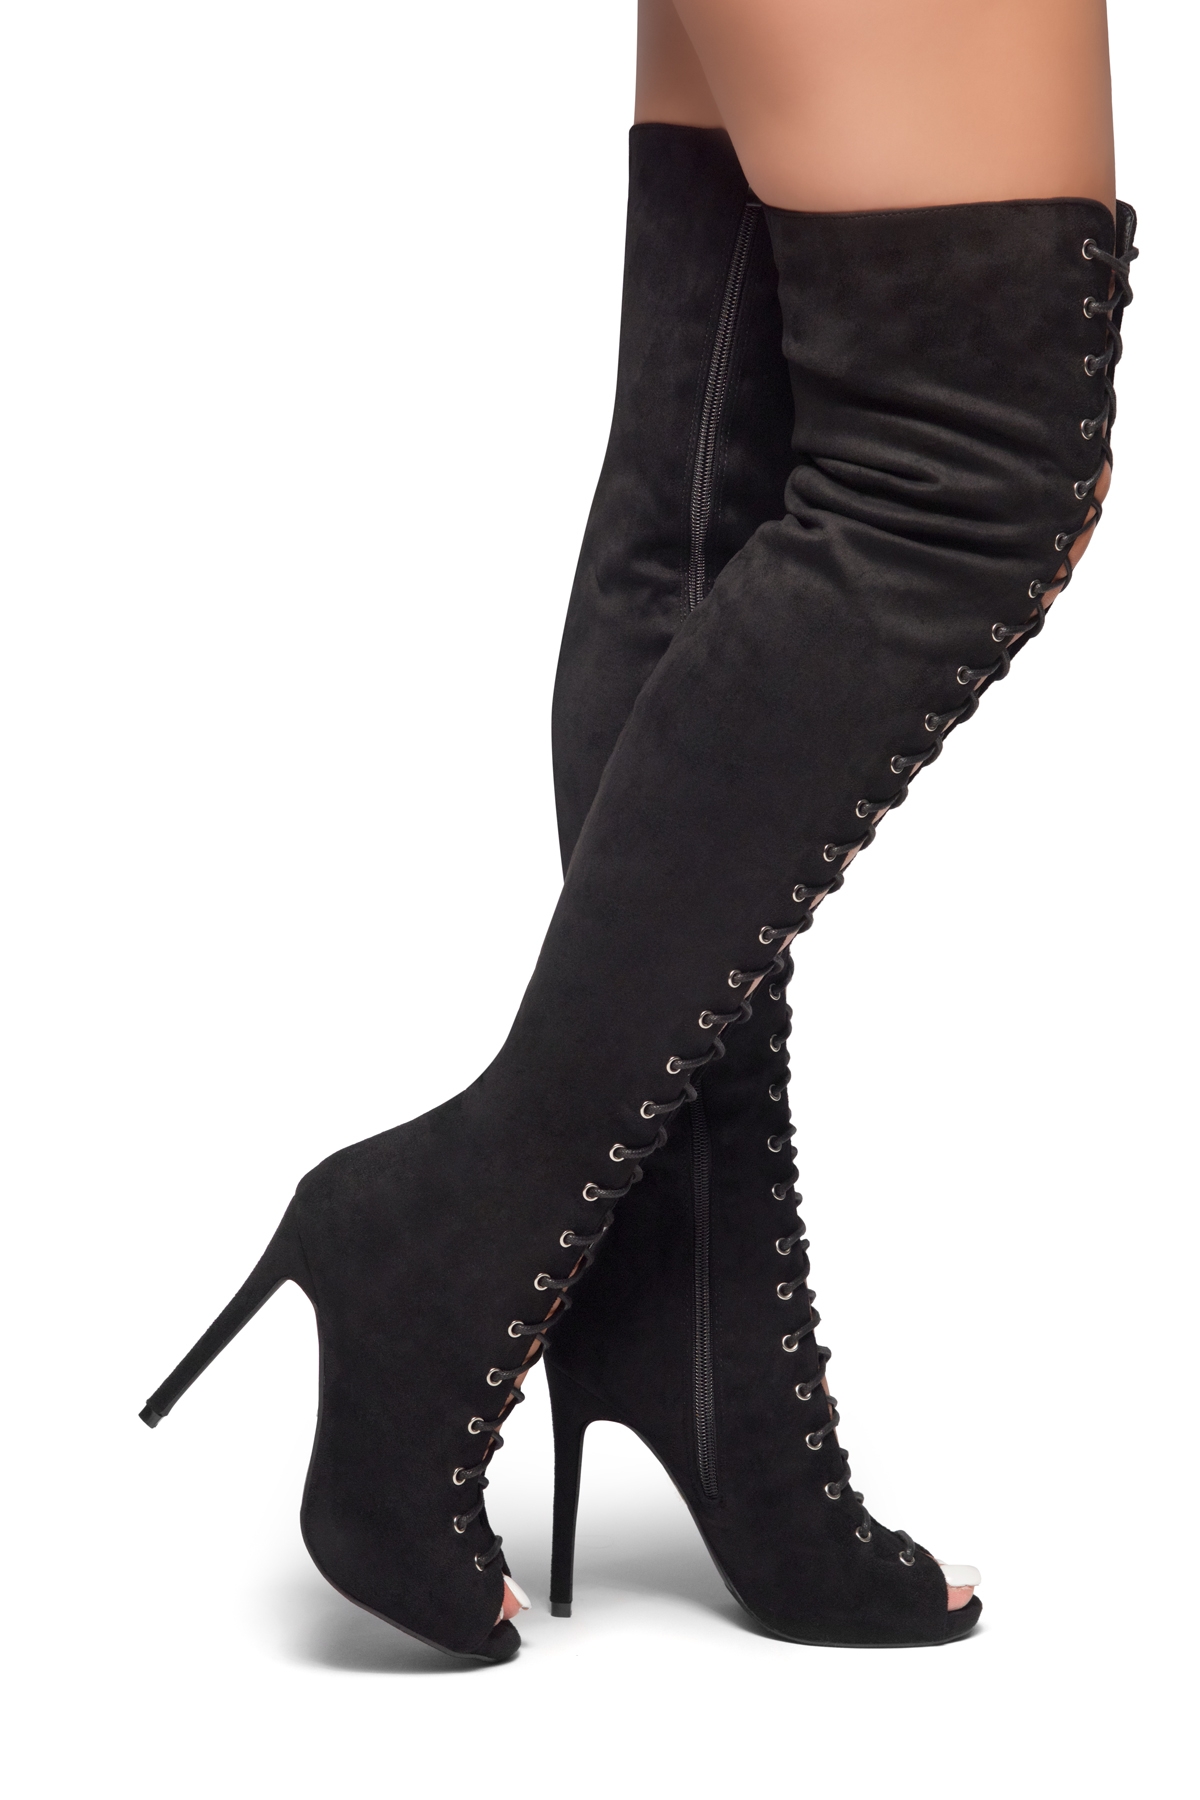 boots heels herstyle mirucia-lace up, peep toe, stiletto heel, thigh high boots (black) GXDCPZB